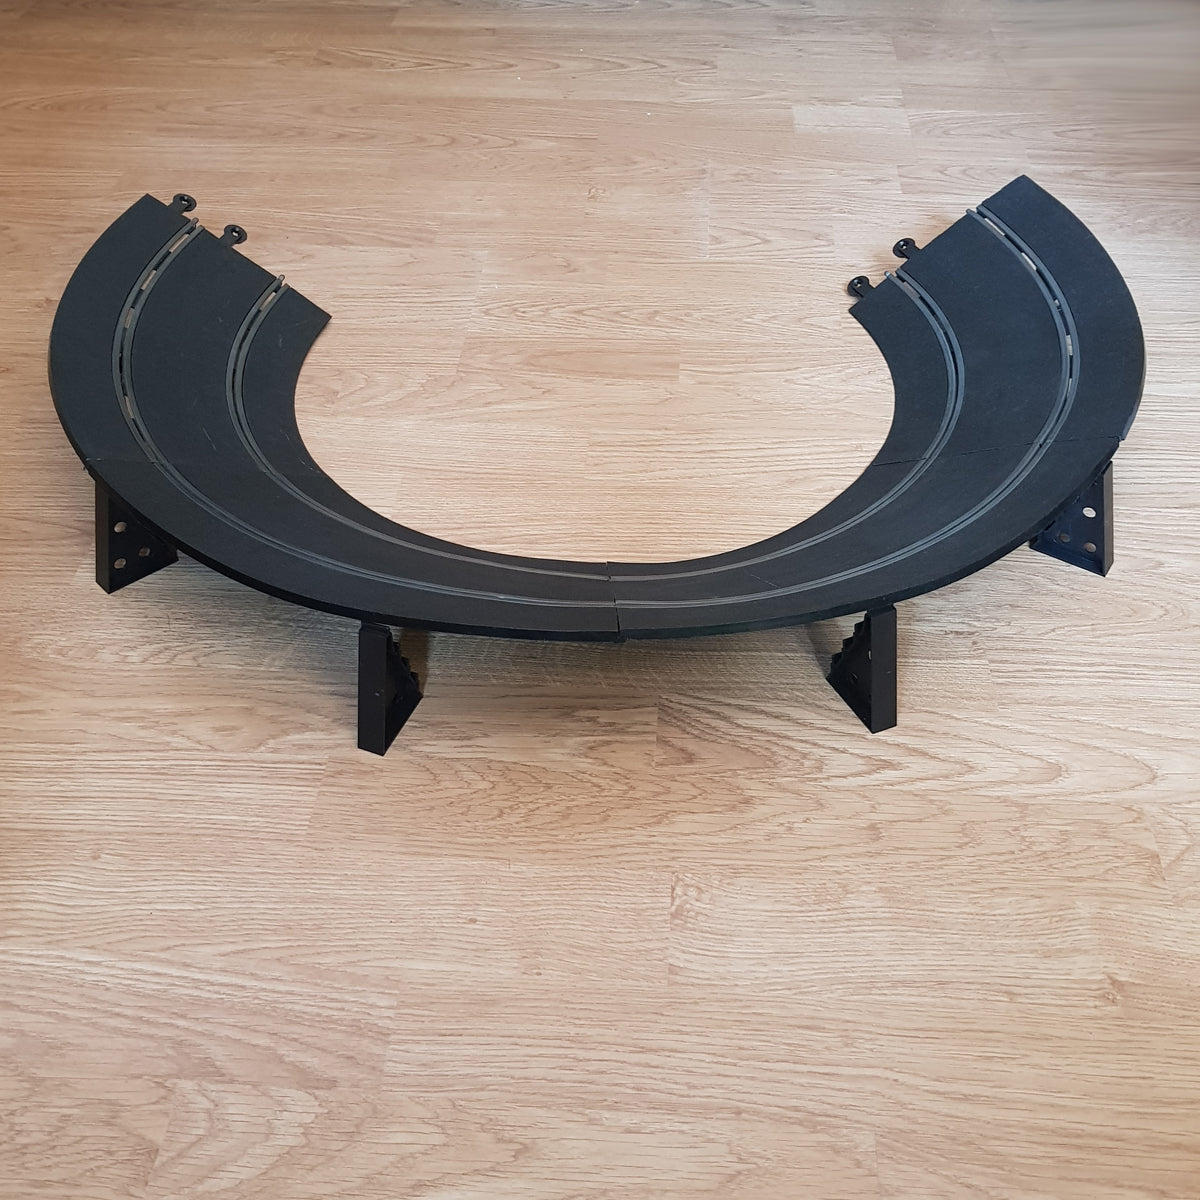 Scalextric 1:32 Classic Track - C187 - 4 Banked Curves & 6 Bridge Supports - Action Slot Racing